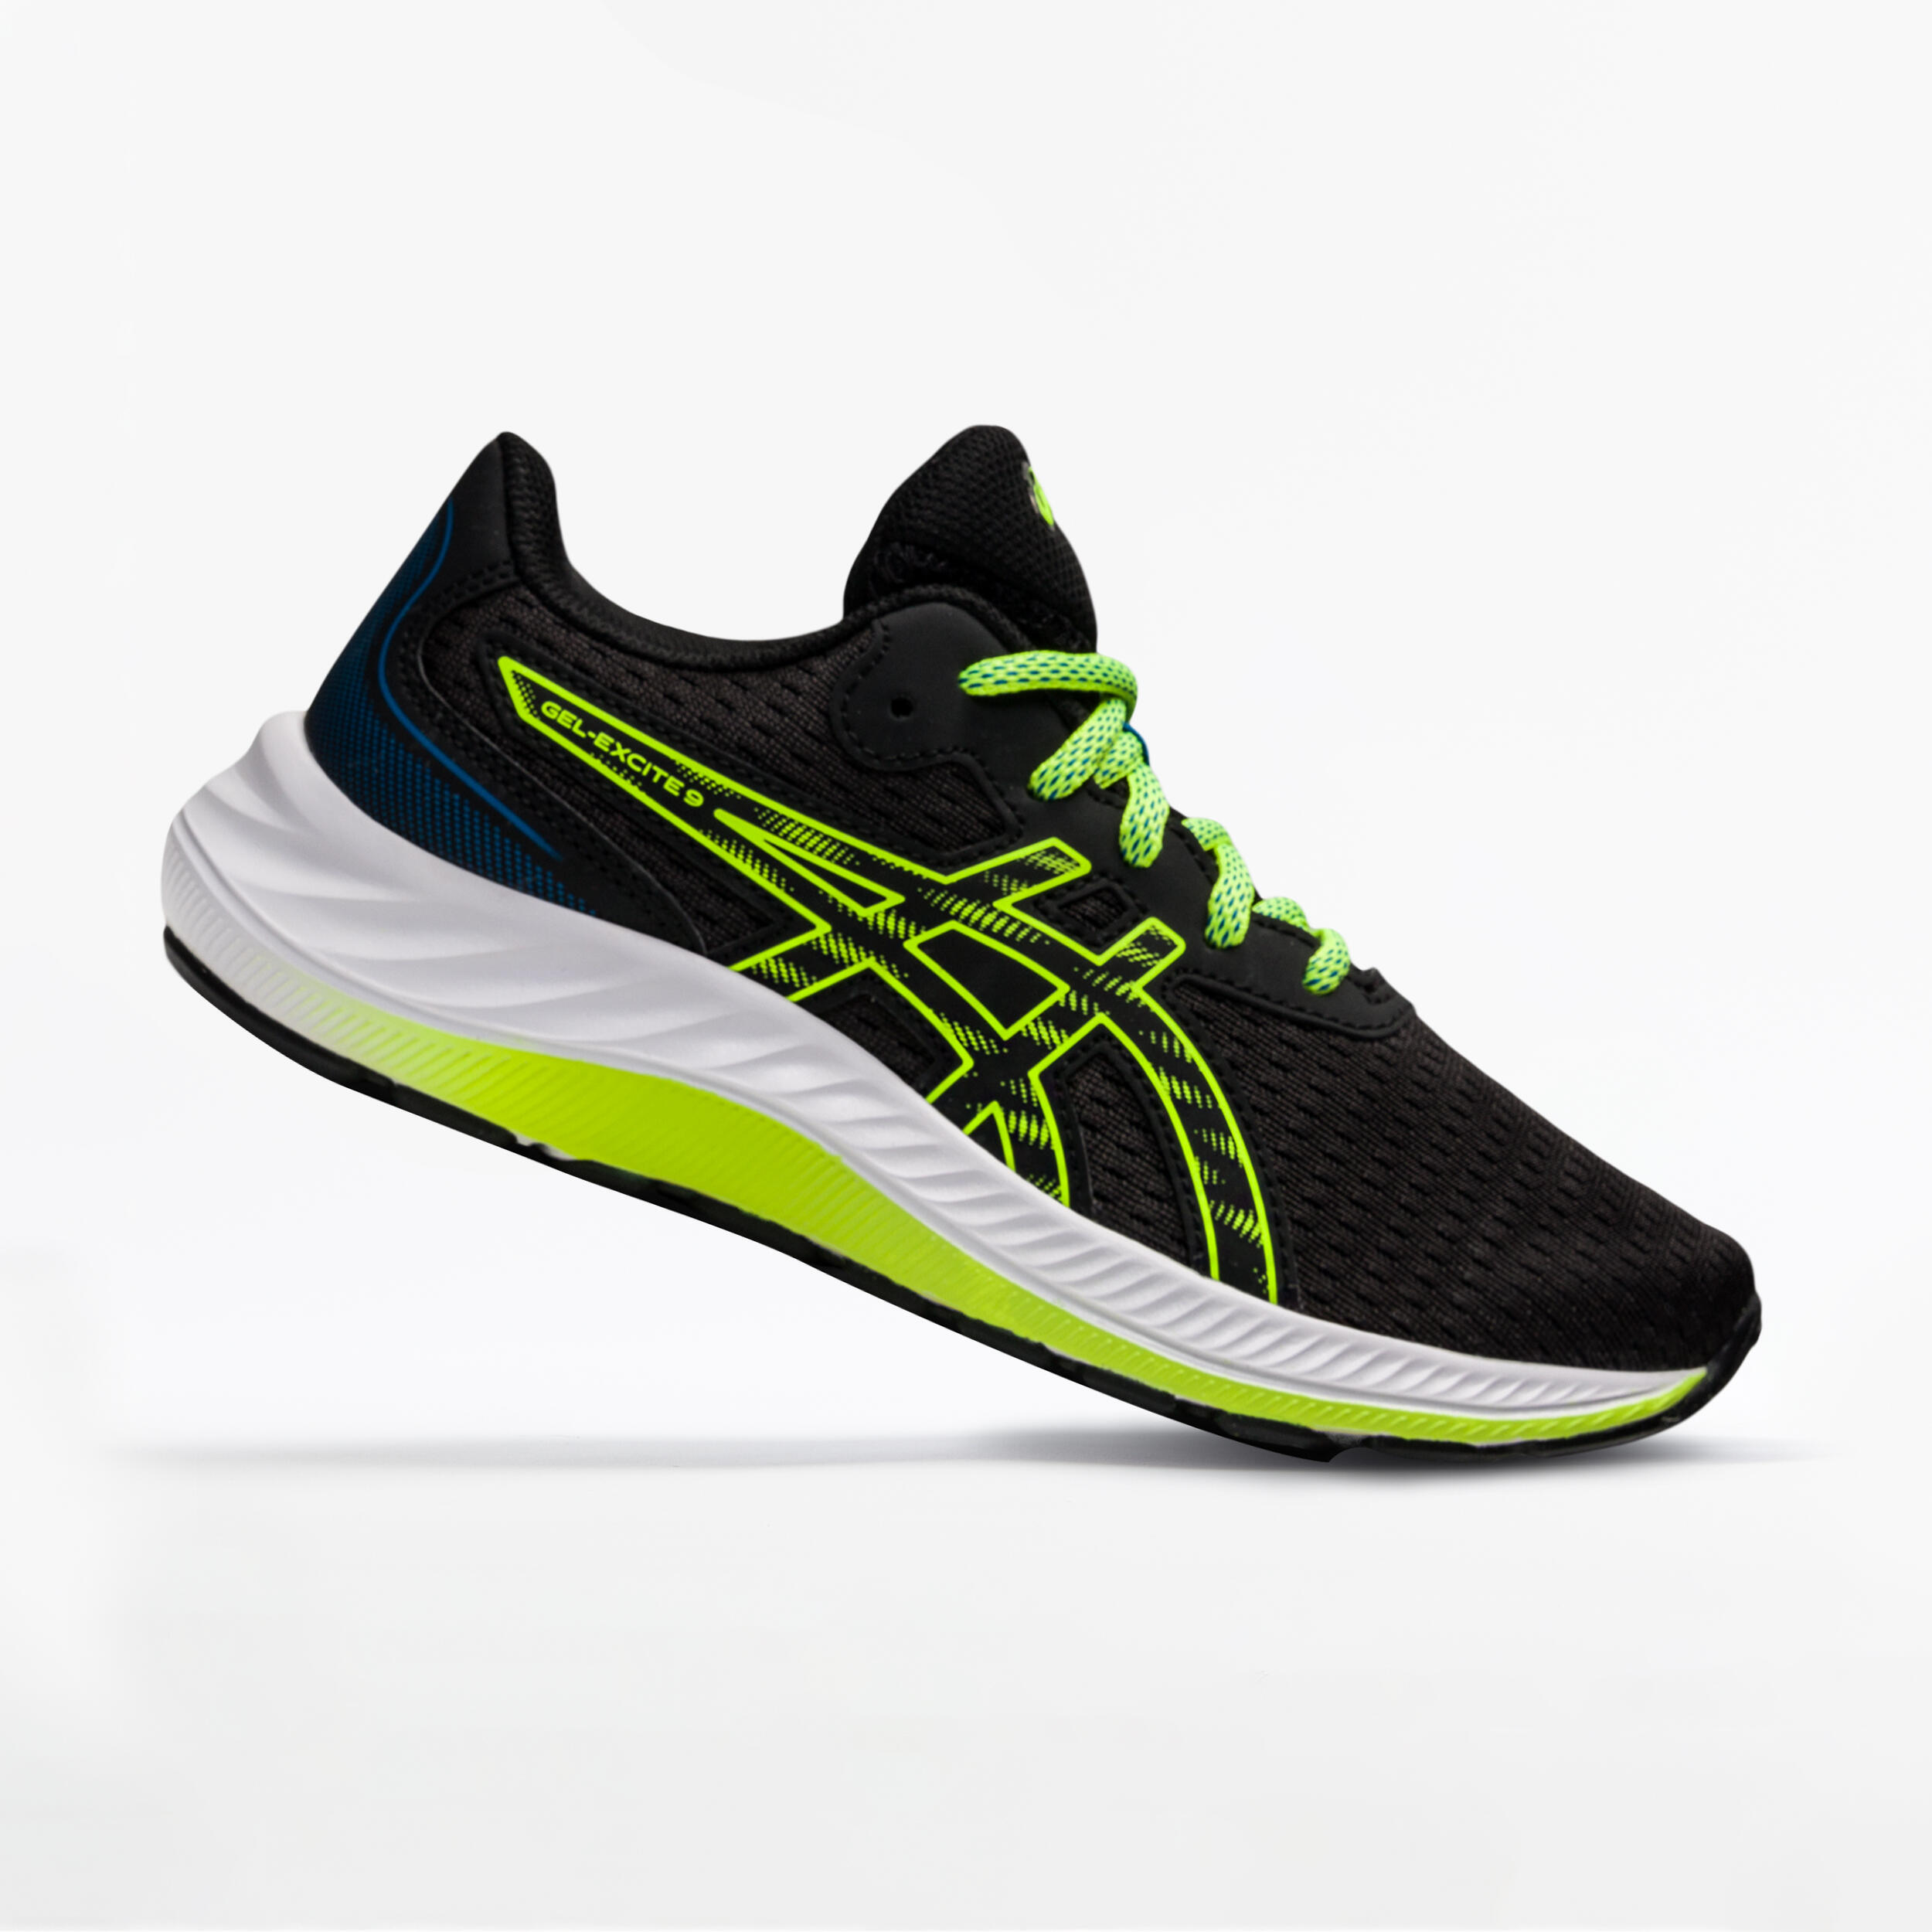 Kids' Running Shoes Gel Excite 9 GS - Black/Yellow 1/8